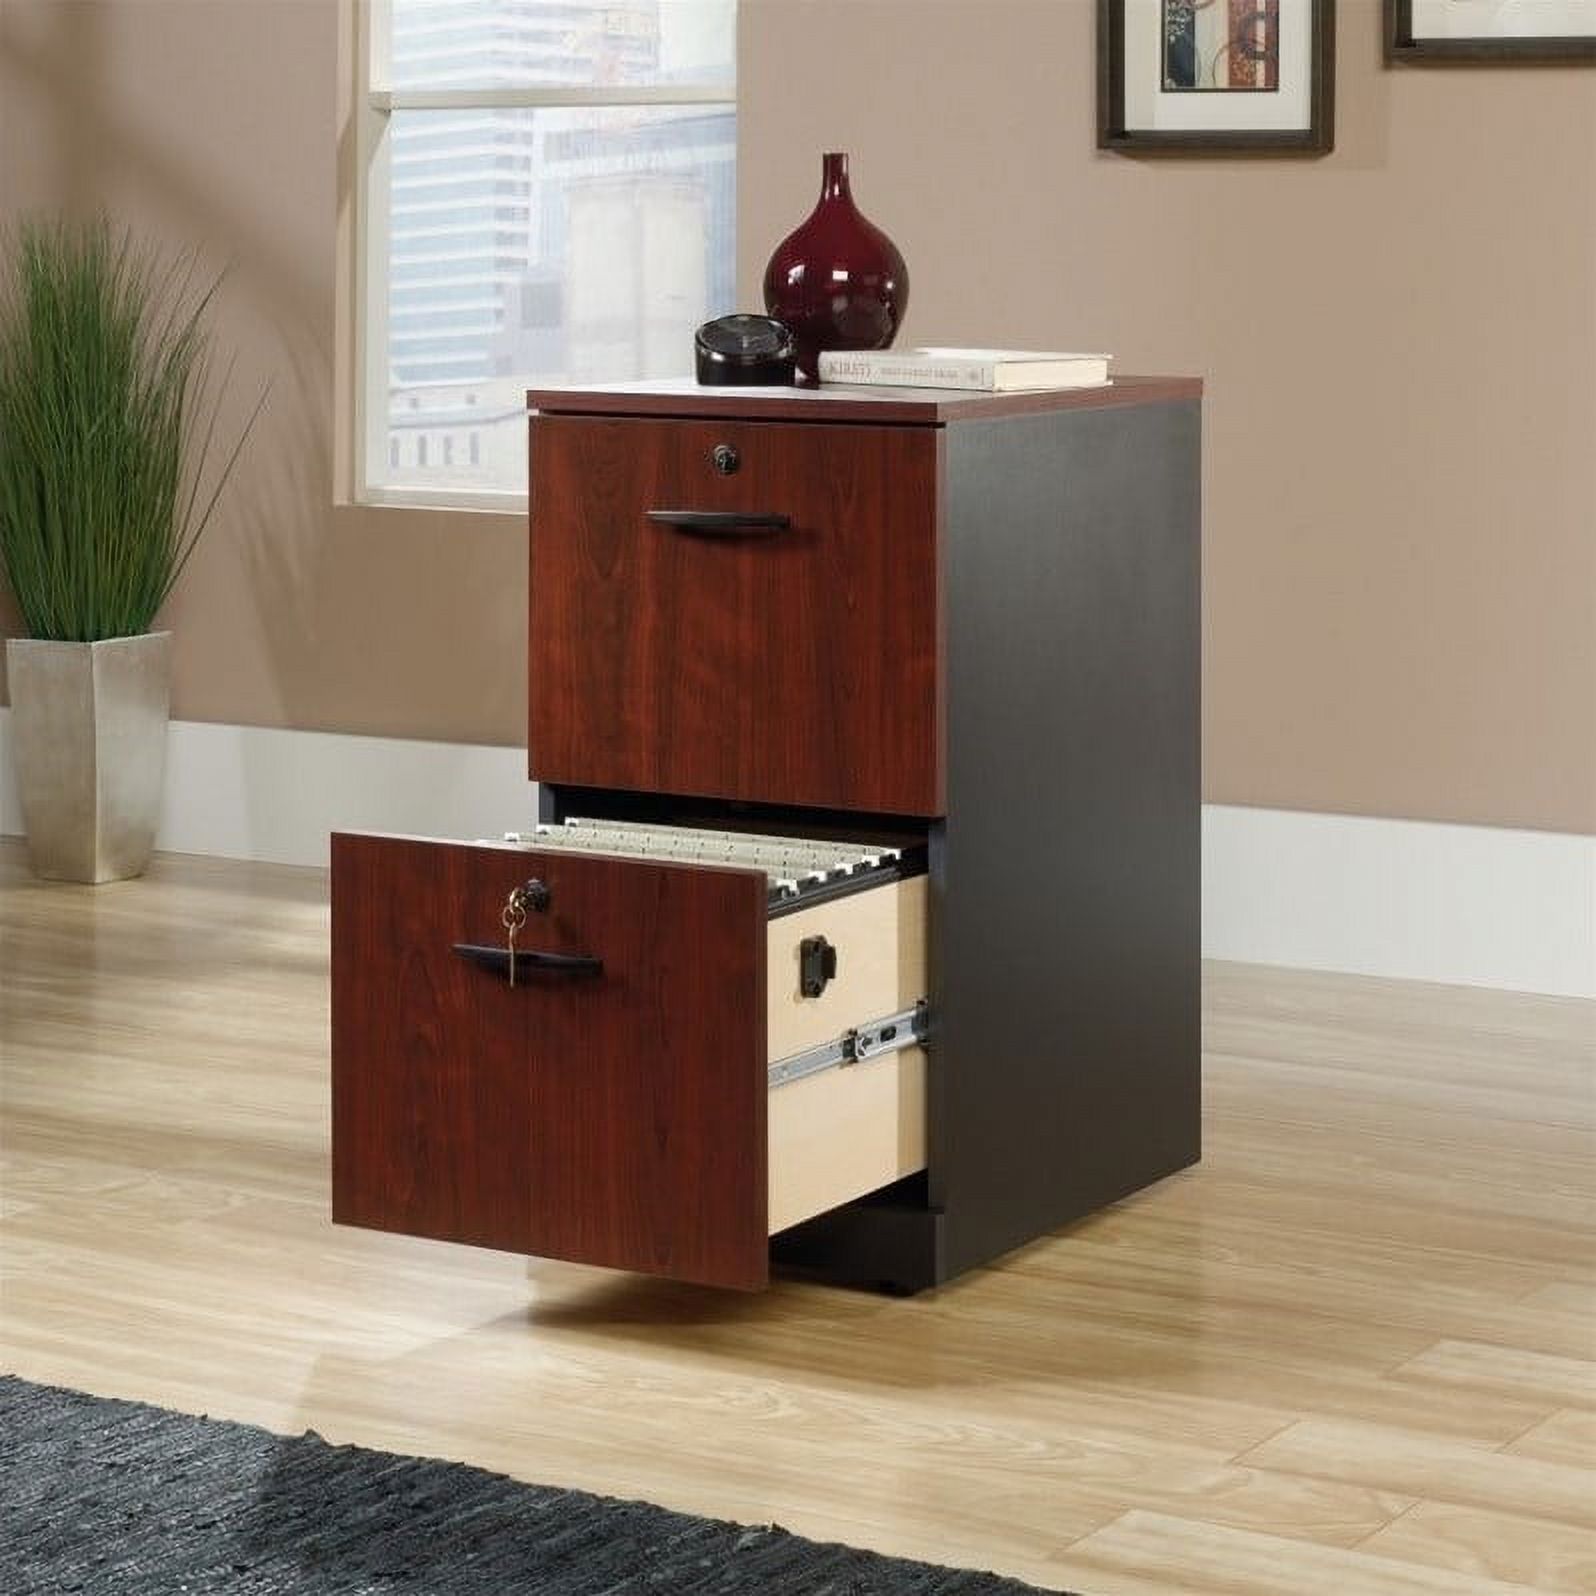 Home Square 2 Drawer Wood Filing Cabinet Set in Classic Cherry (Set of 2) - image 3 of 8